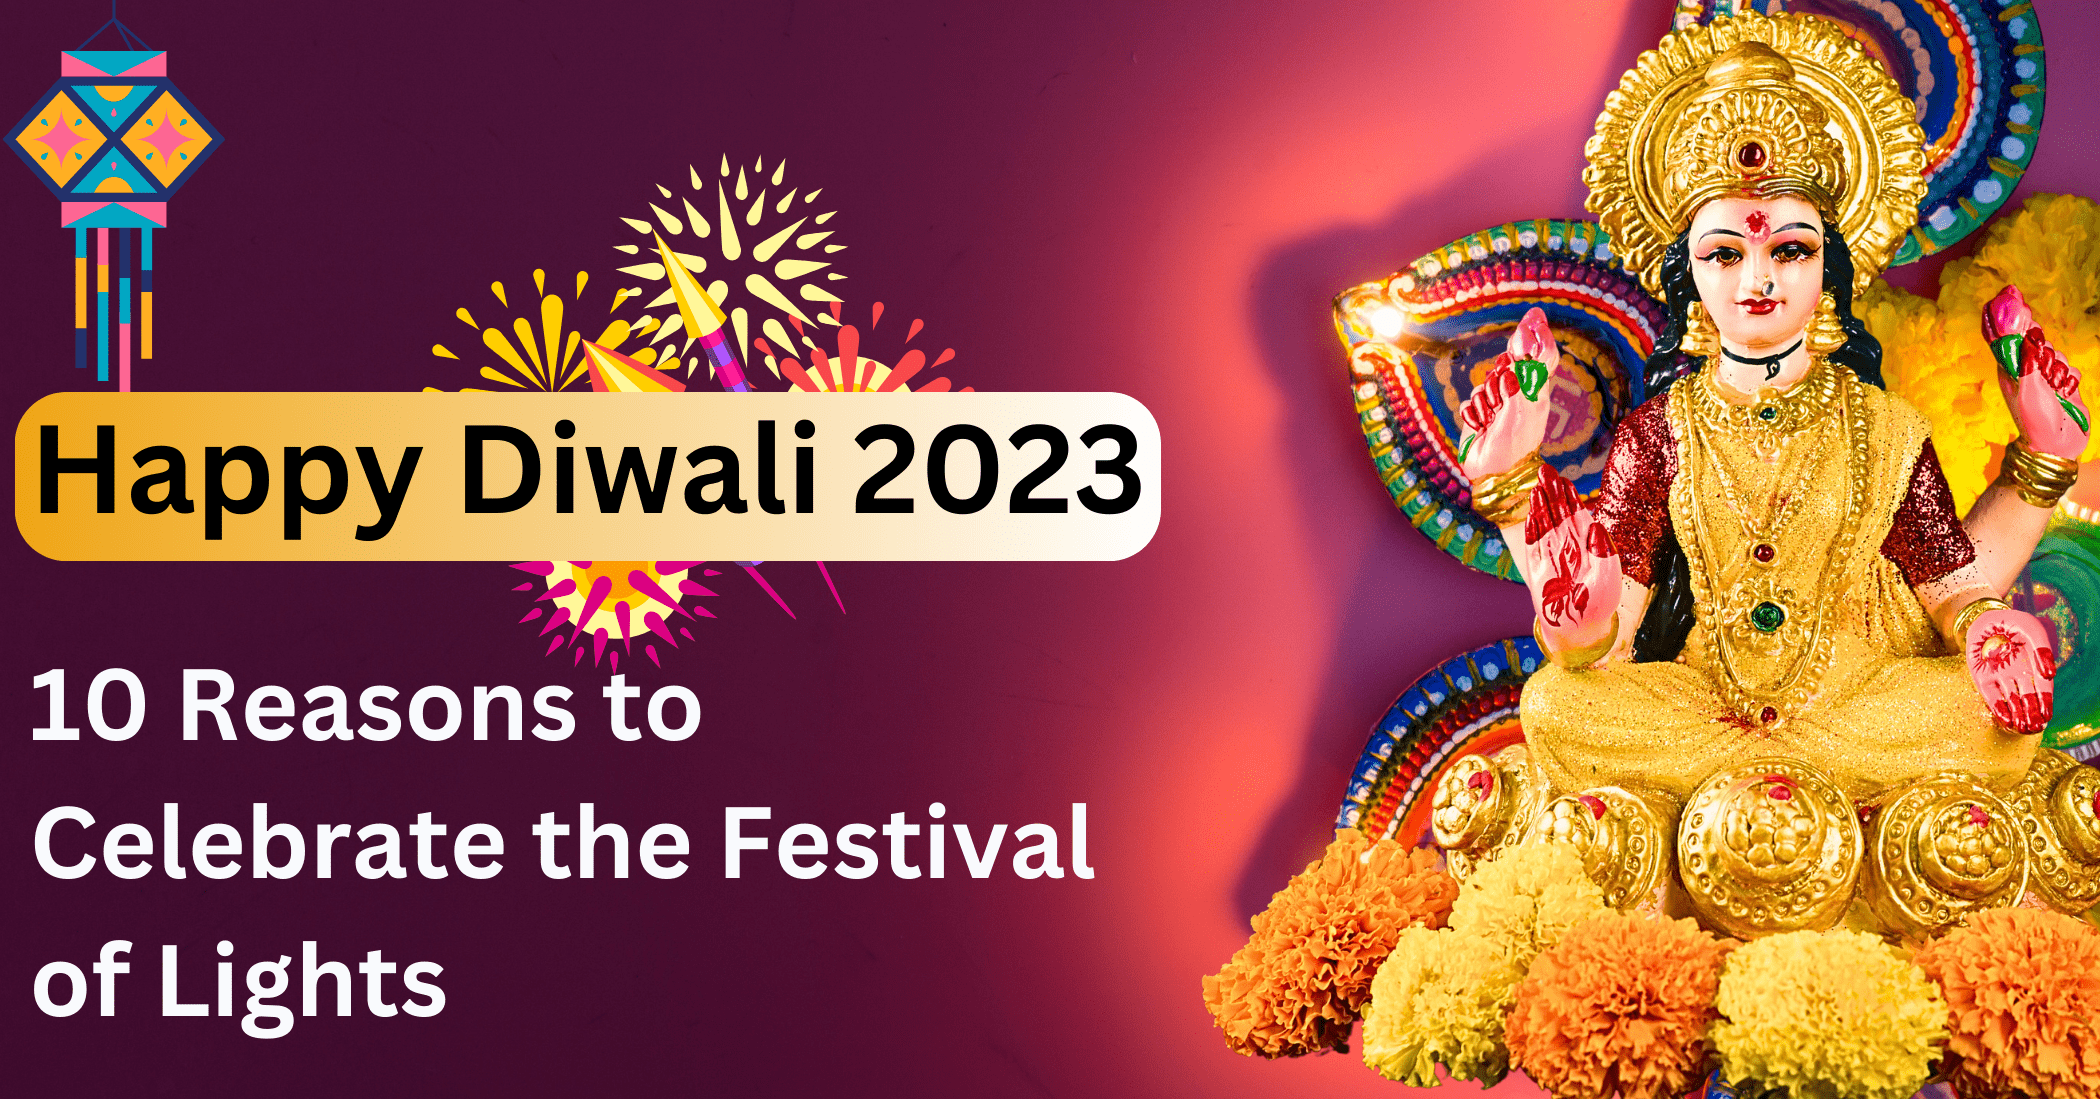 Happy Diwali 2023: 10 Reasons to Celebrate the Festival of Lights